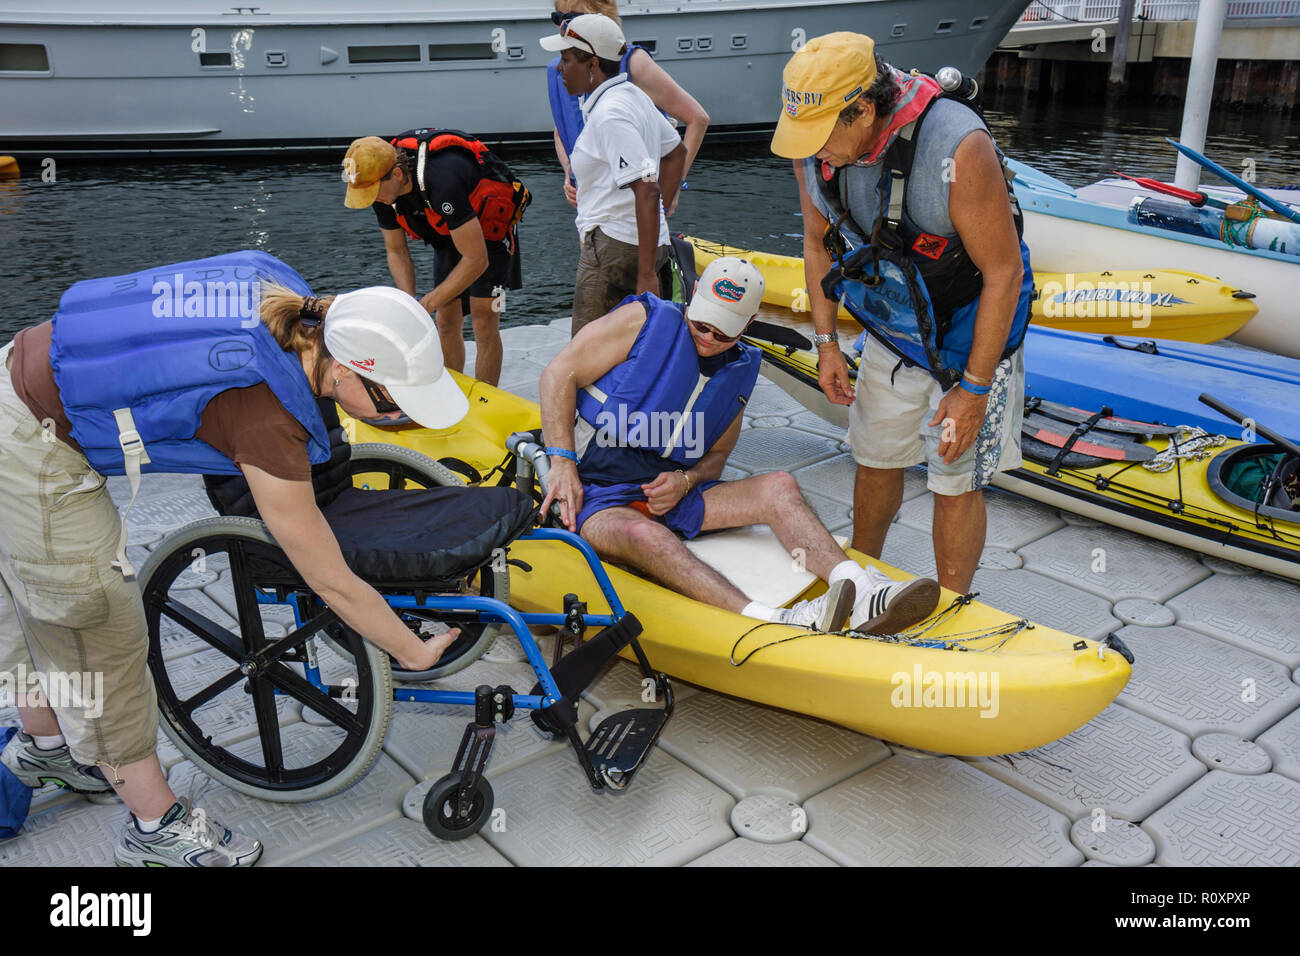 Miami Florida,Coconut Grove,Shake a Leg Miami,No Barriers Festival,disabled handicapped special needs,physical disability,adaptive water sports,kayak, Stock Photo